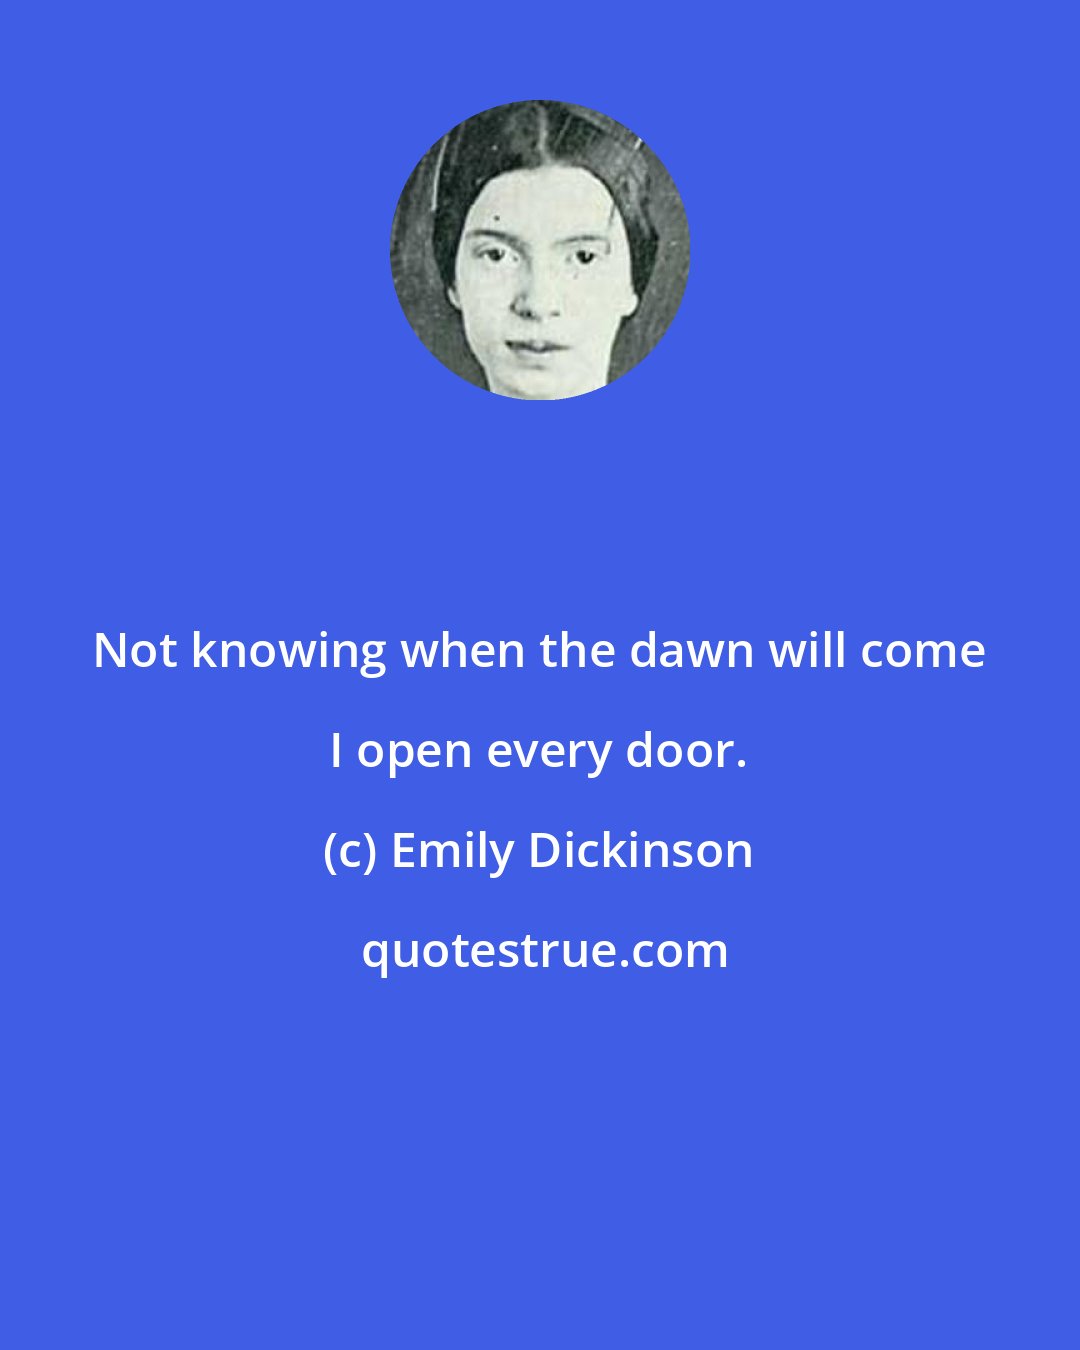 Emily Dickinson: Not knowing when the dawn will come I open every door.